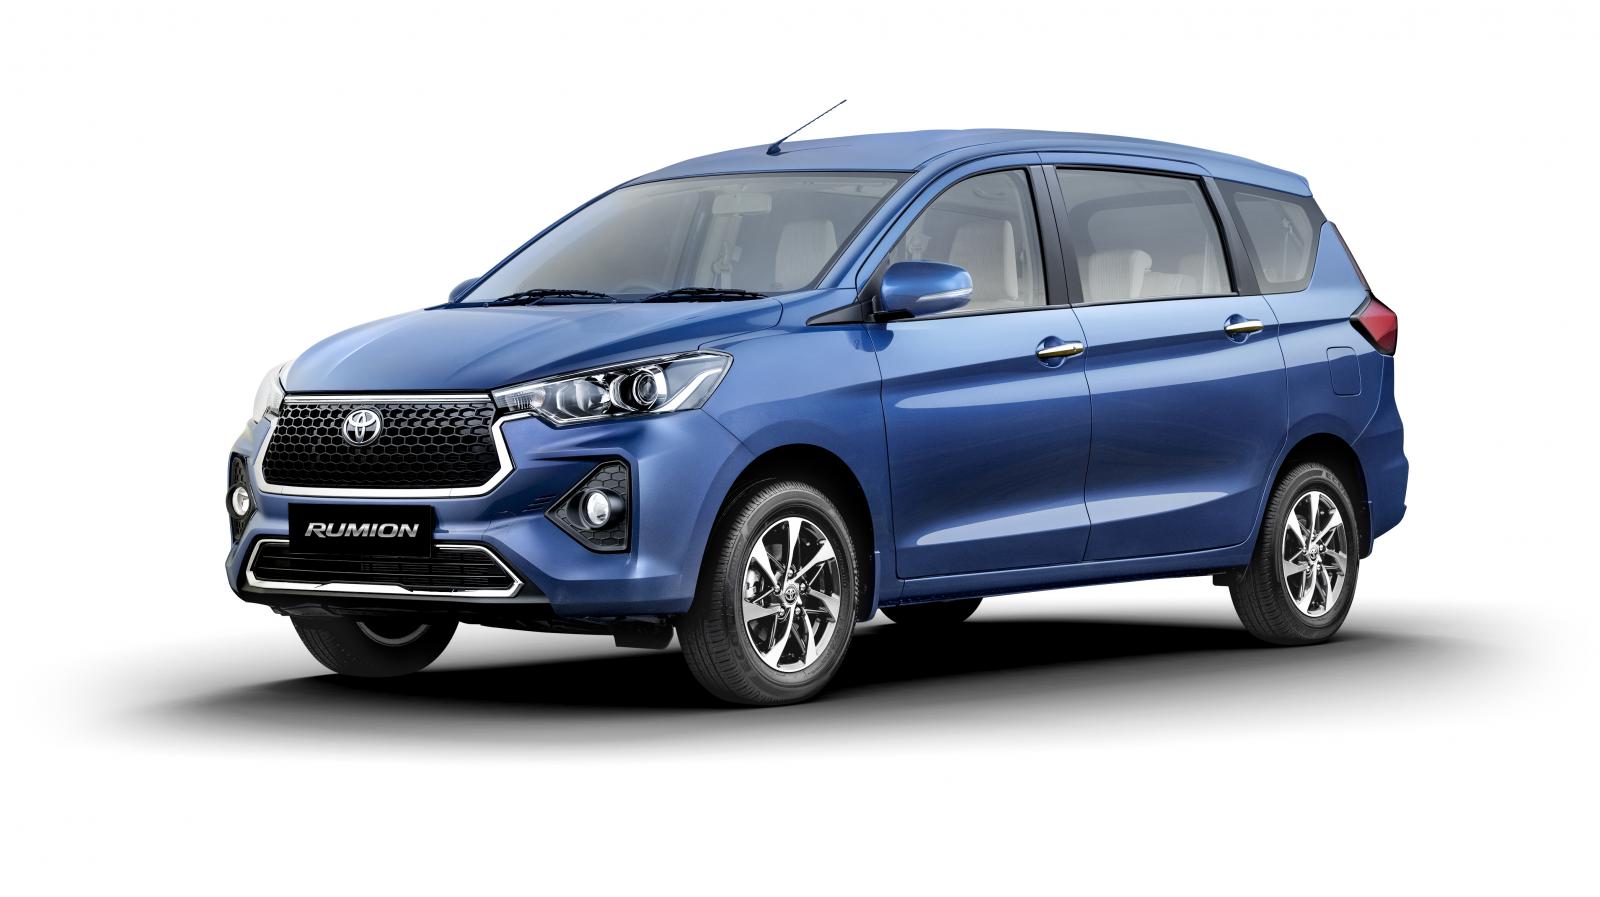 Car rental in Goa - Book Toyota Rumion (Automatic) for self drive